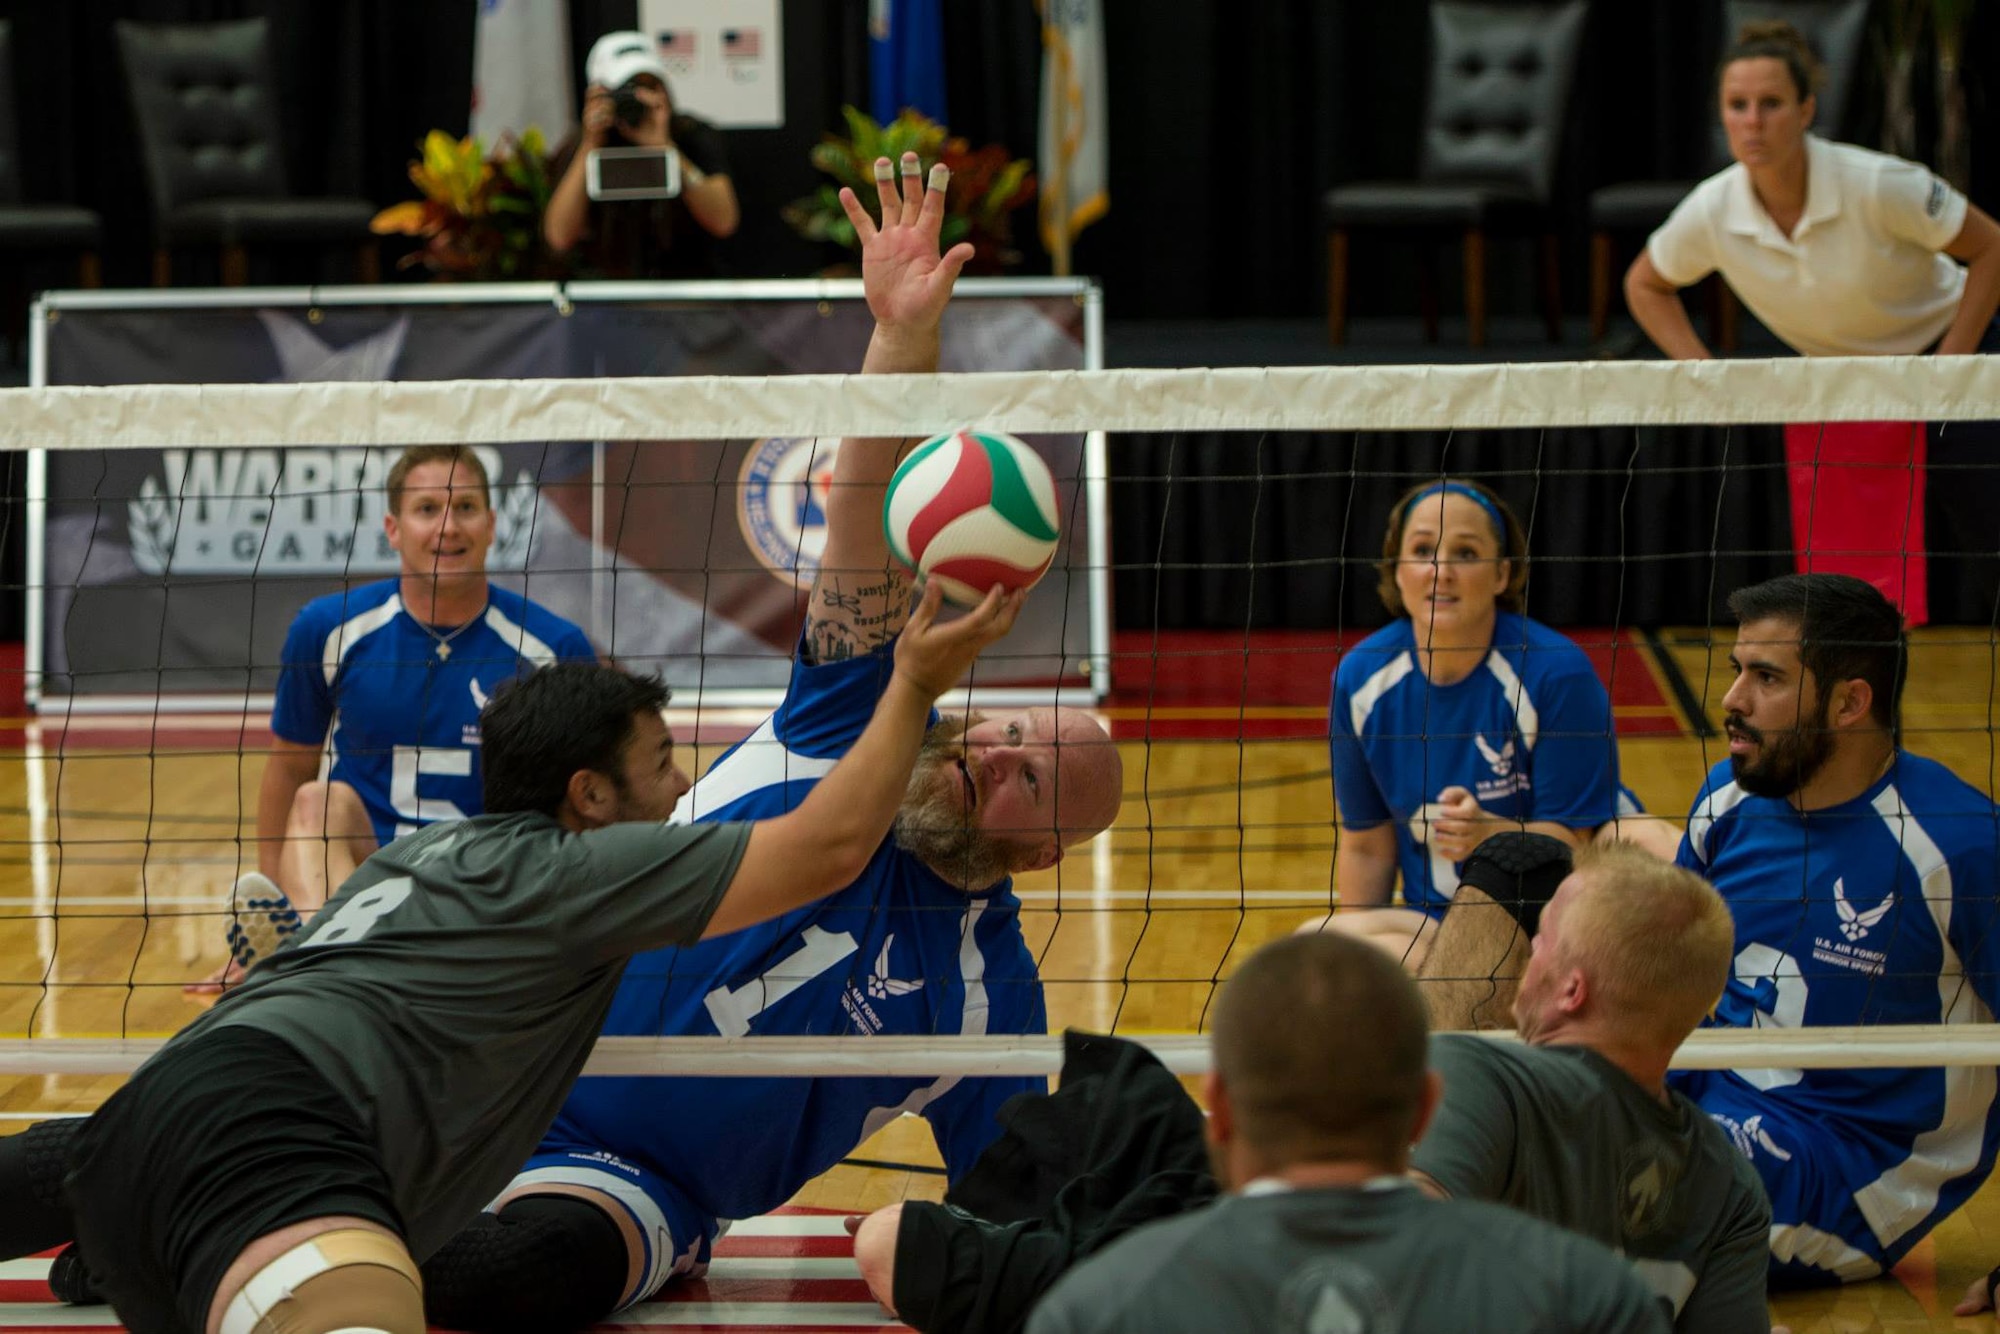 The U.S. Air Force team blocks a ball during a match of sitting volleyball at the opening day of the Wounded Warrior Games September 28, 2014 at the Olympic Training Center in Colorado Springs, Colorado. The 2014 Warrior Games features wounded athletes from throughout the Department of Defense who compete in Olympic style events for their respective military branch. The goal of the games is to help highlight the limitless potential of warriors through competitive sports. (U.S. Air Force photo by Airman 1st Class Taylor Queen) 